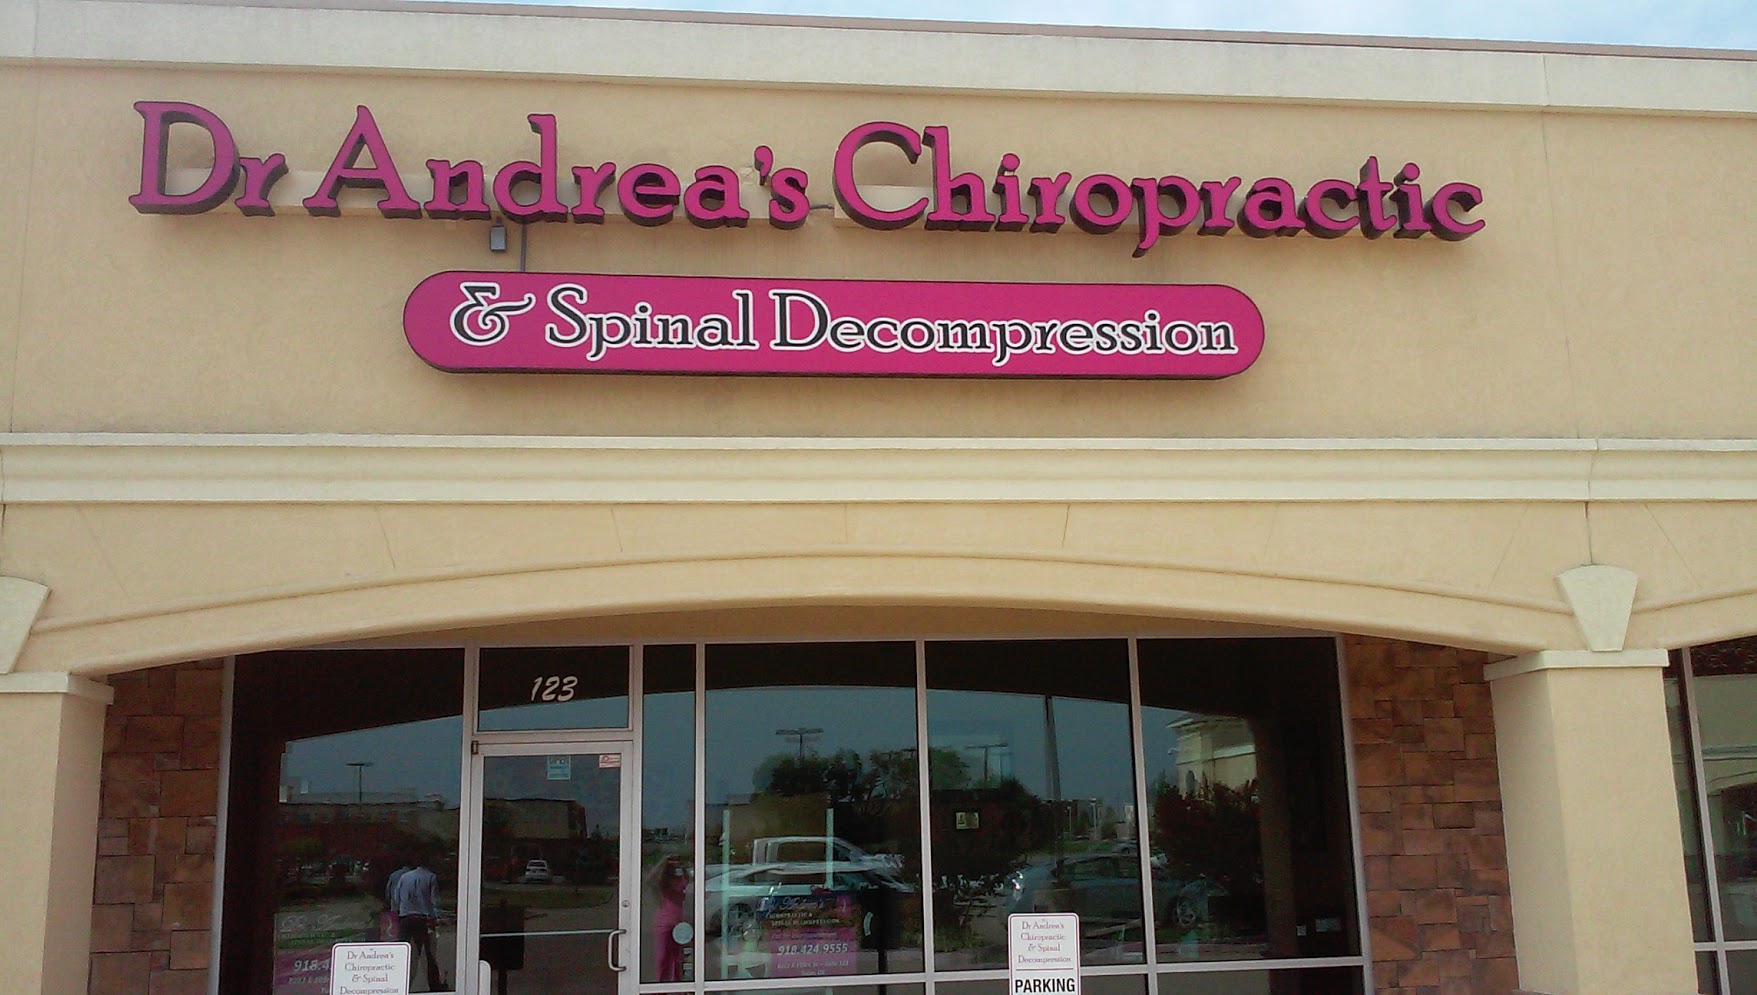 Dr. Andrea's Chiropractic & Spinal Decompression